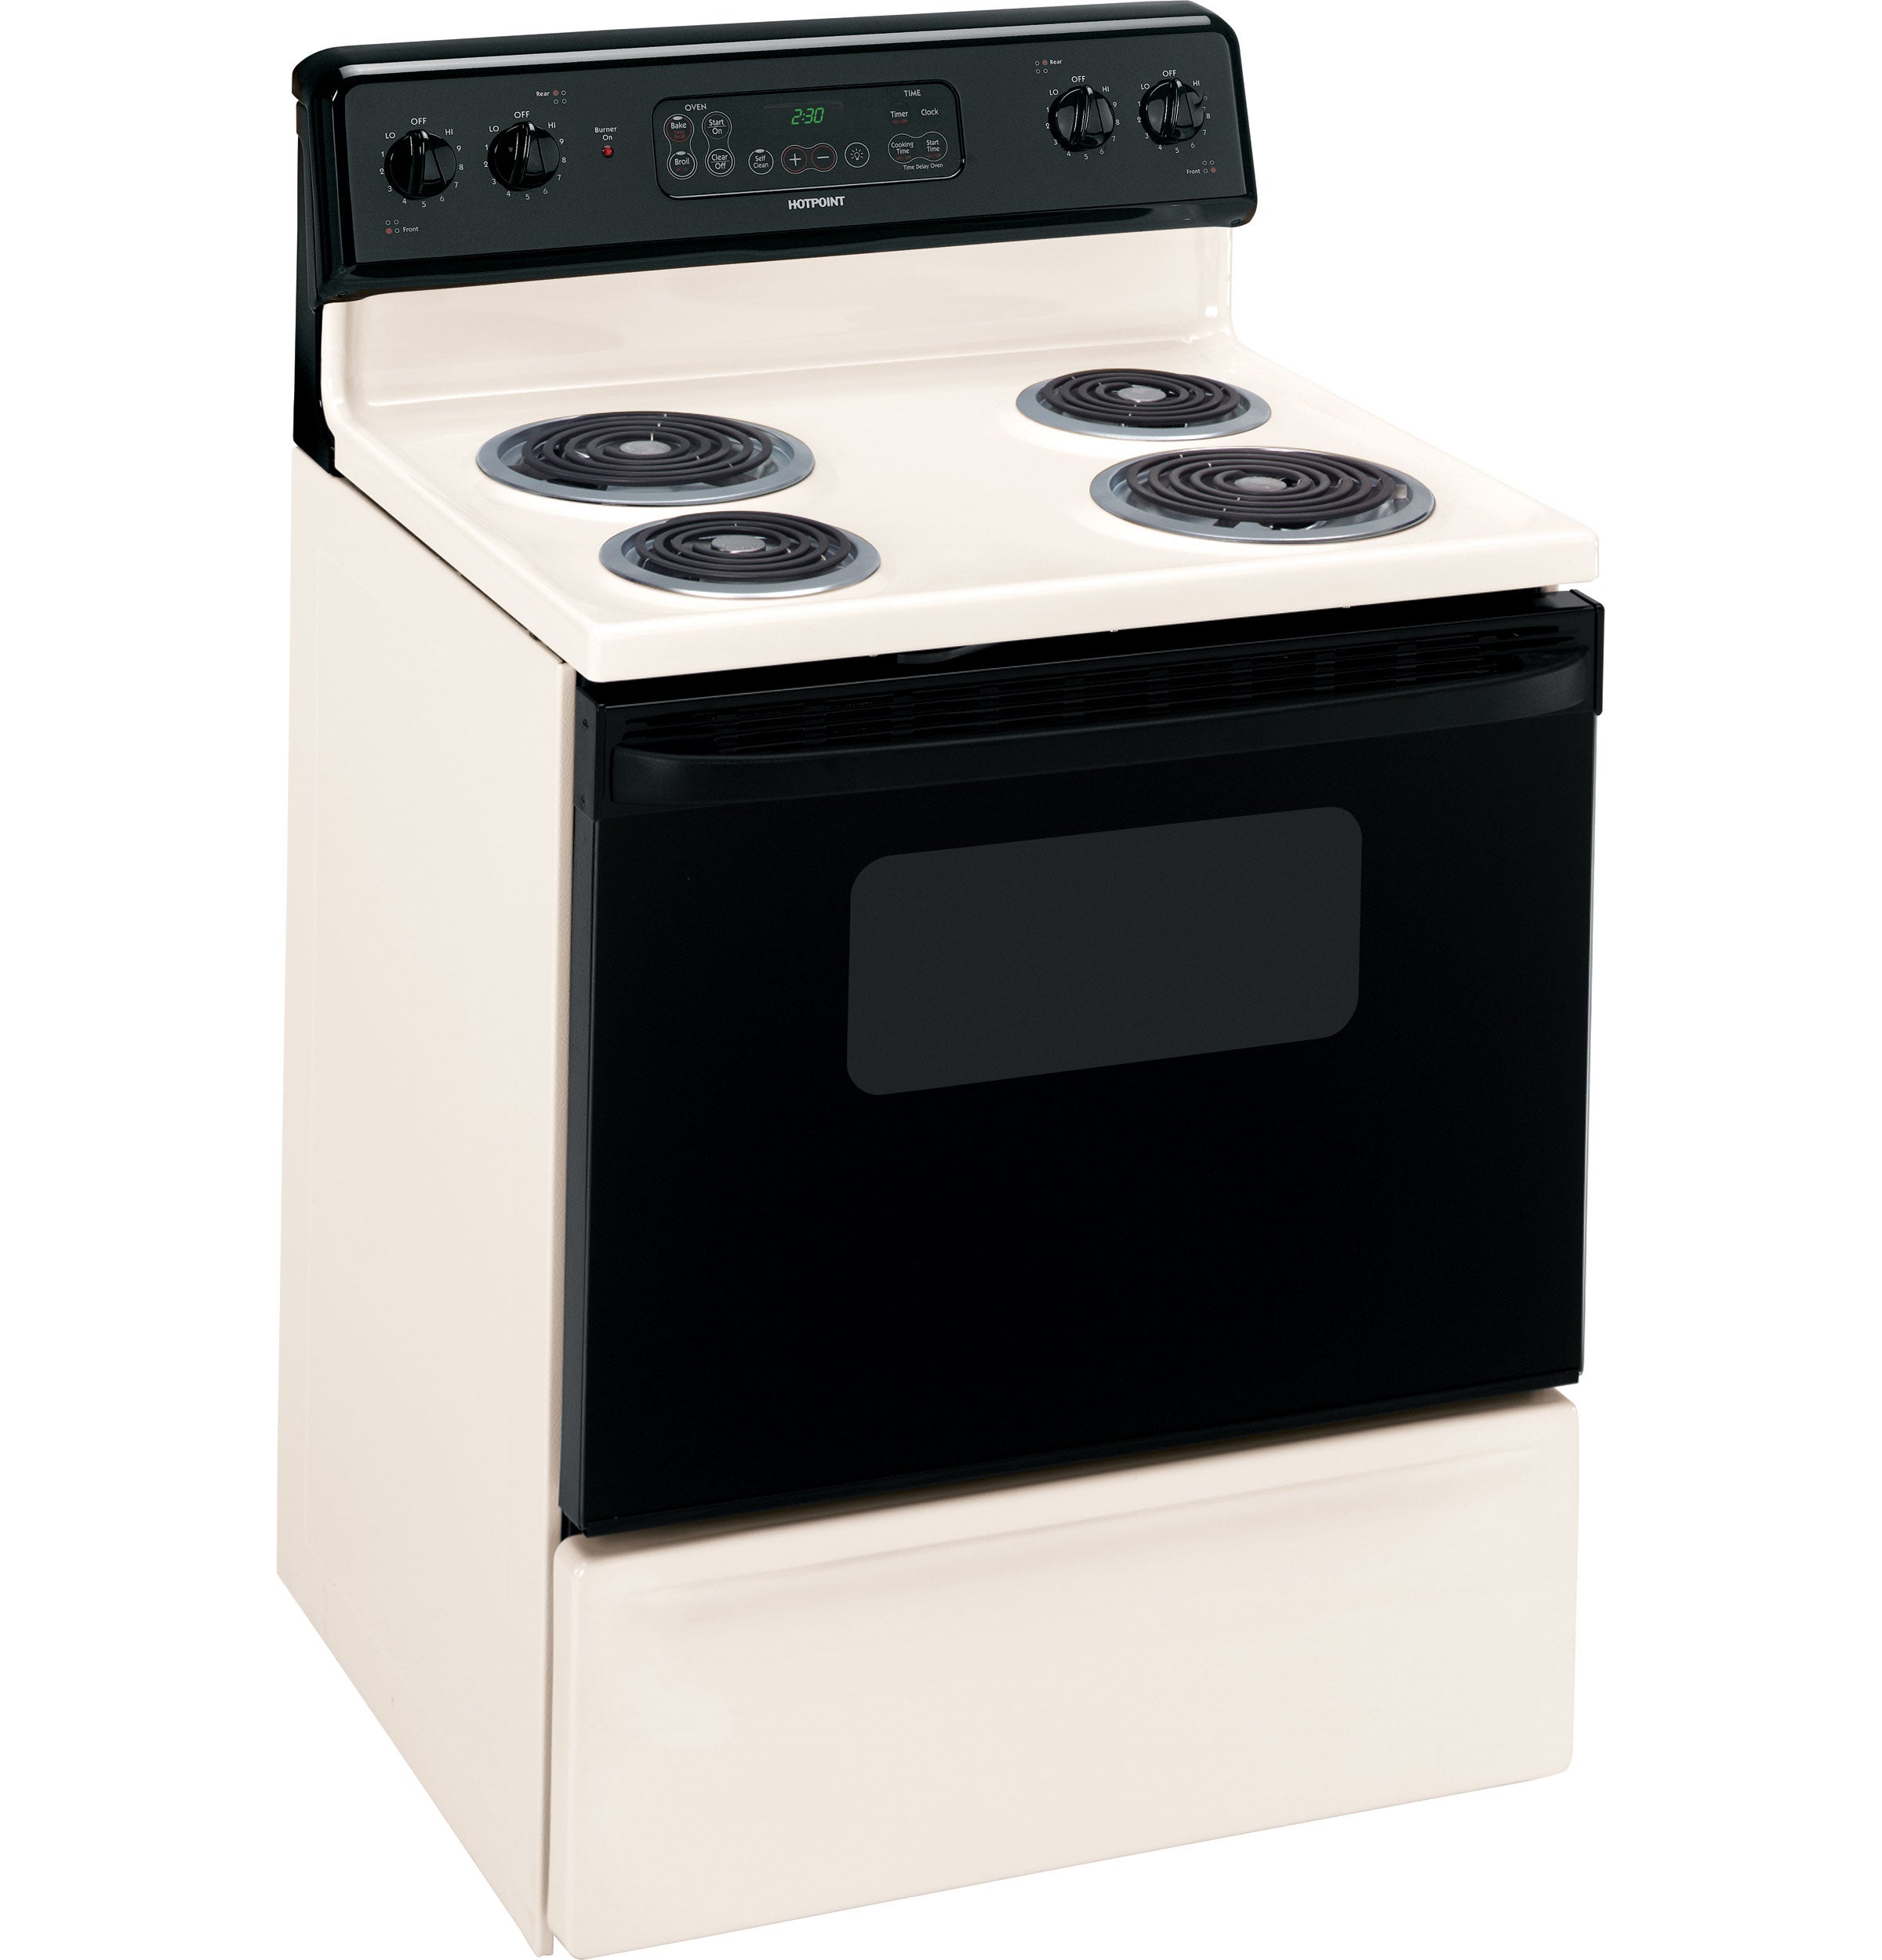 Hotpoint RB757DPCT